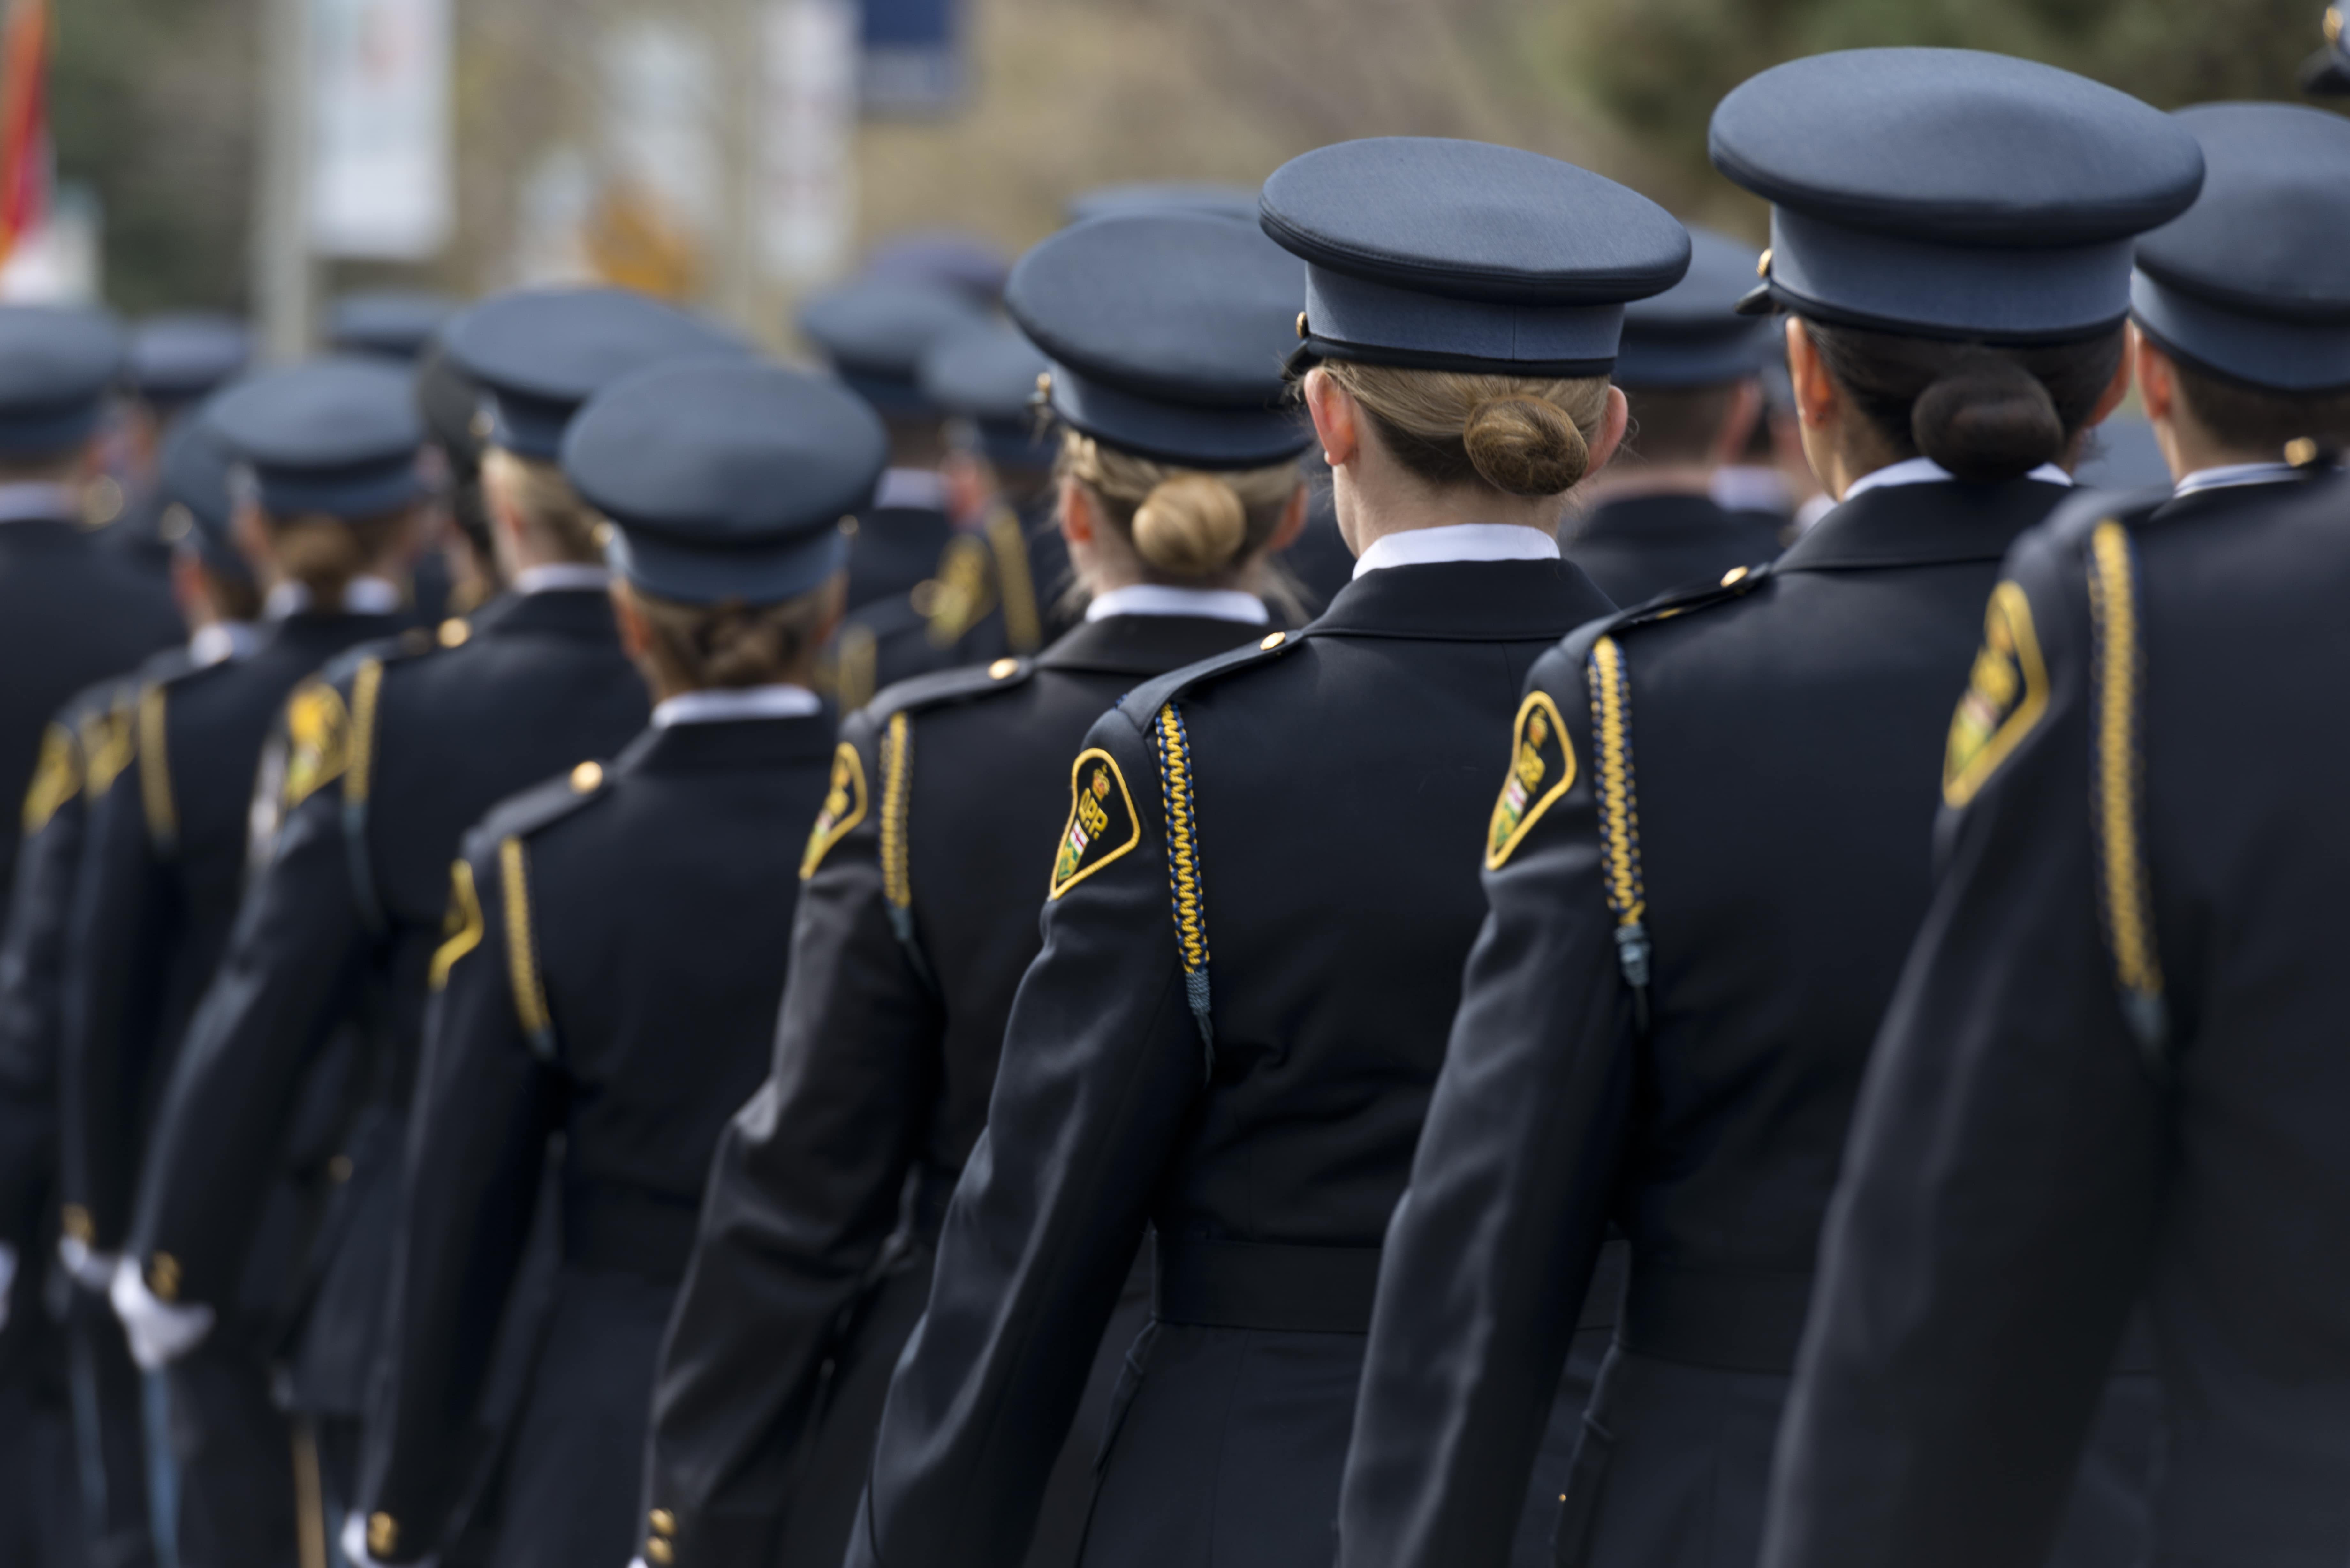 police officer recruits standing in a line